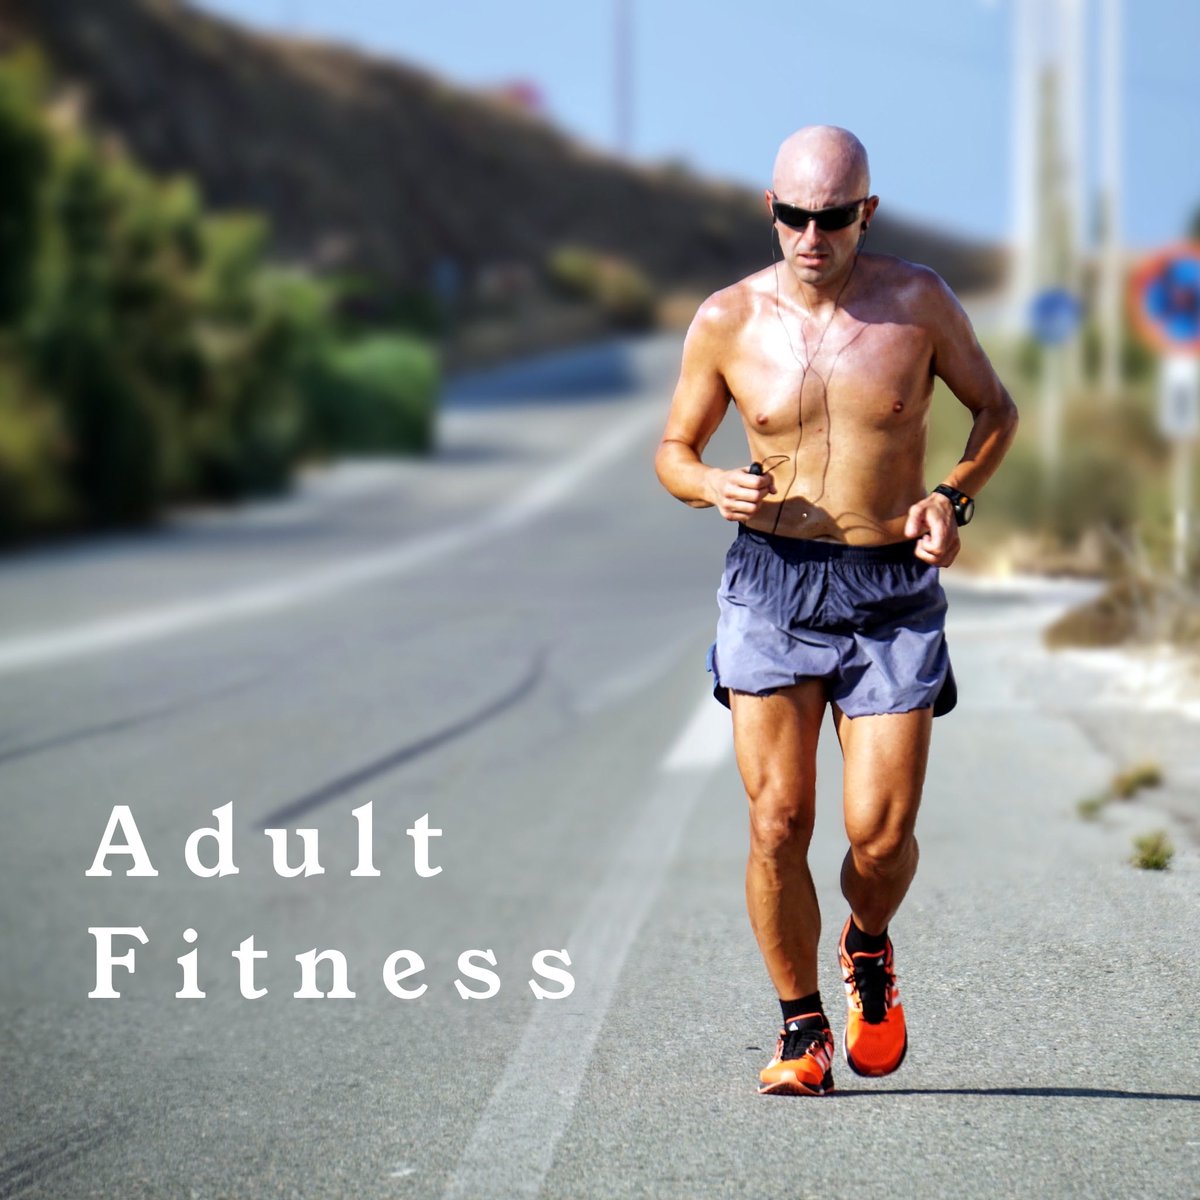 I want to take a moment to describe something I like to call “Adult fitness”.Adult fitness is my term for a level of fitness and activity in ones life that an “adult”, by a certain level of maturity, will achieve.